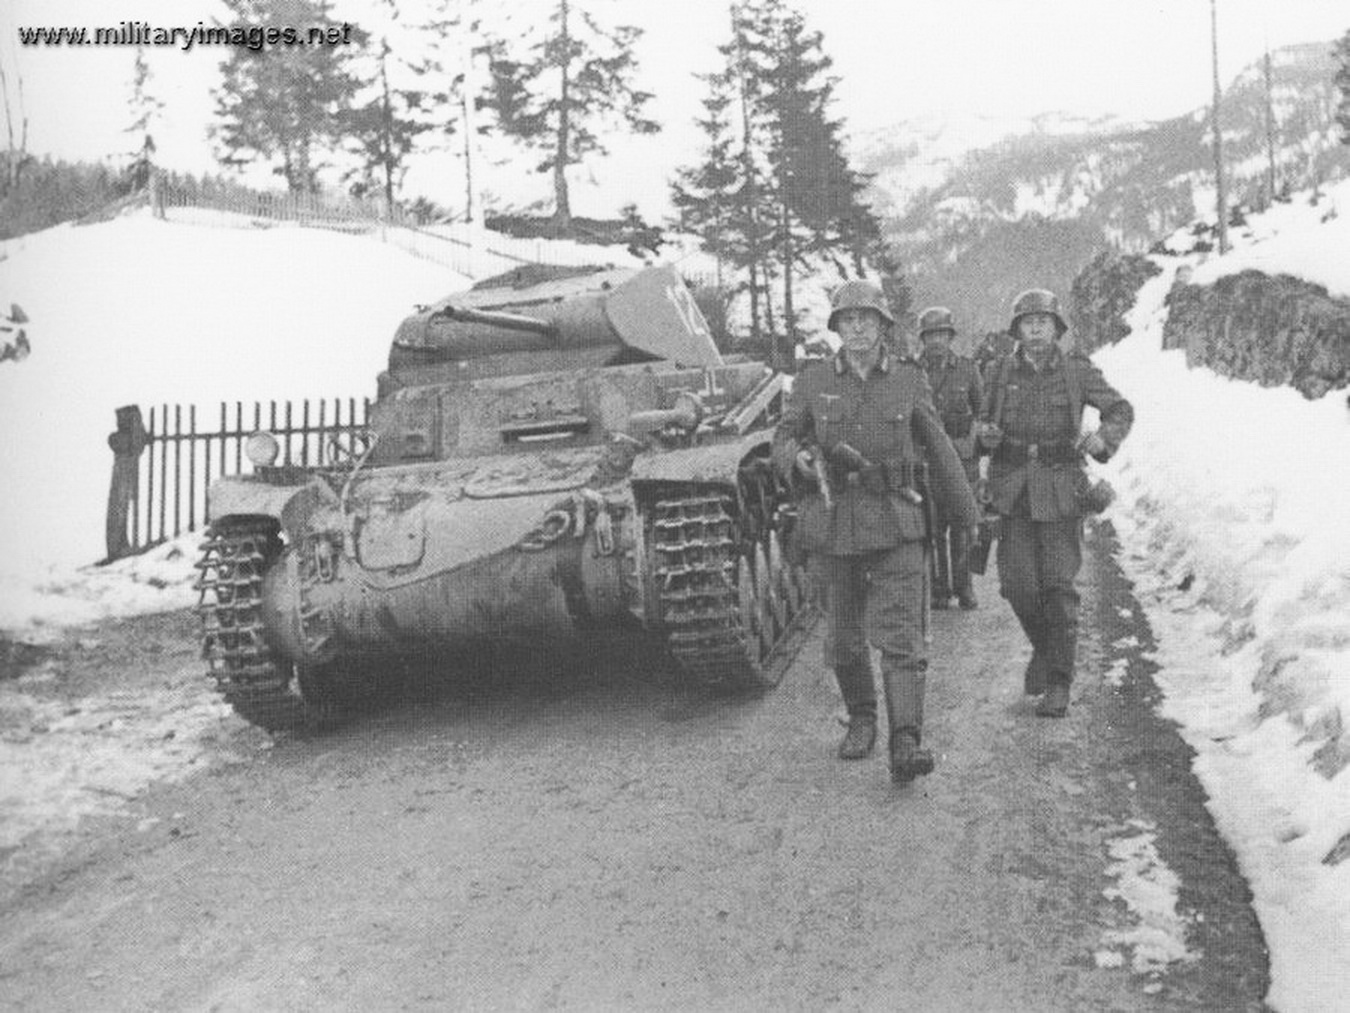 3rdReich_pz2d_WWII_-_Pz_Kpfw_II_and_advancing_infantry_in_Norway.jpg